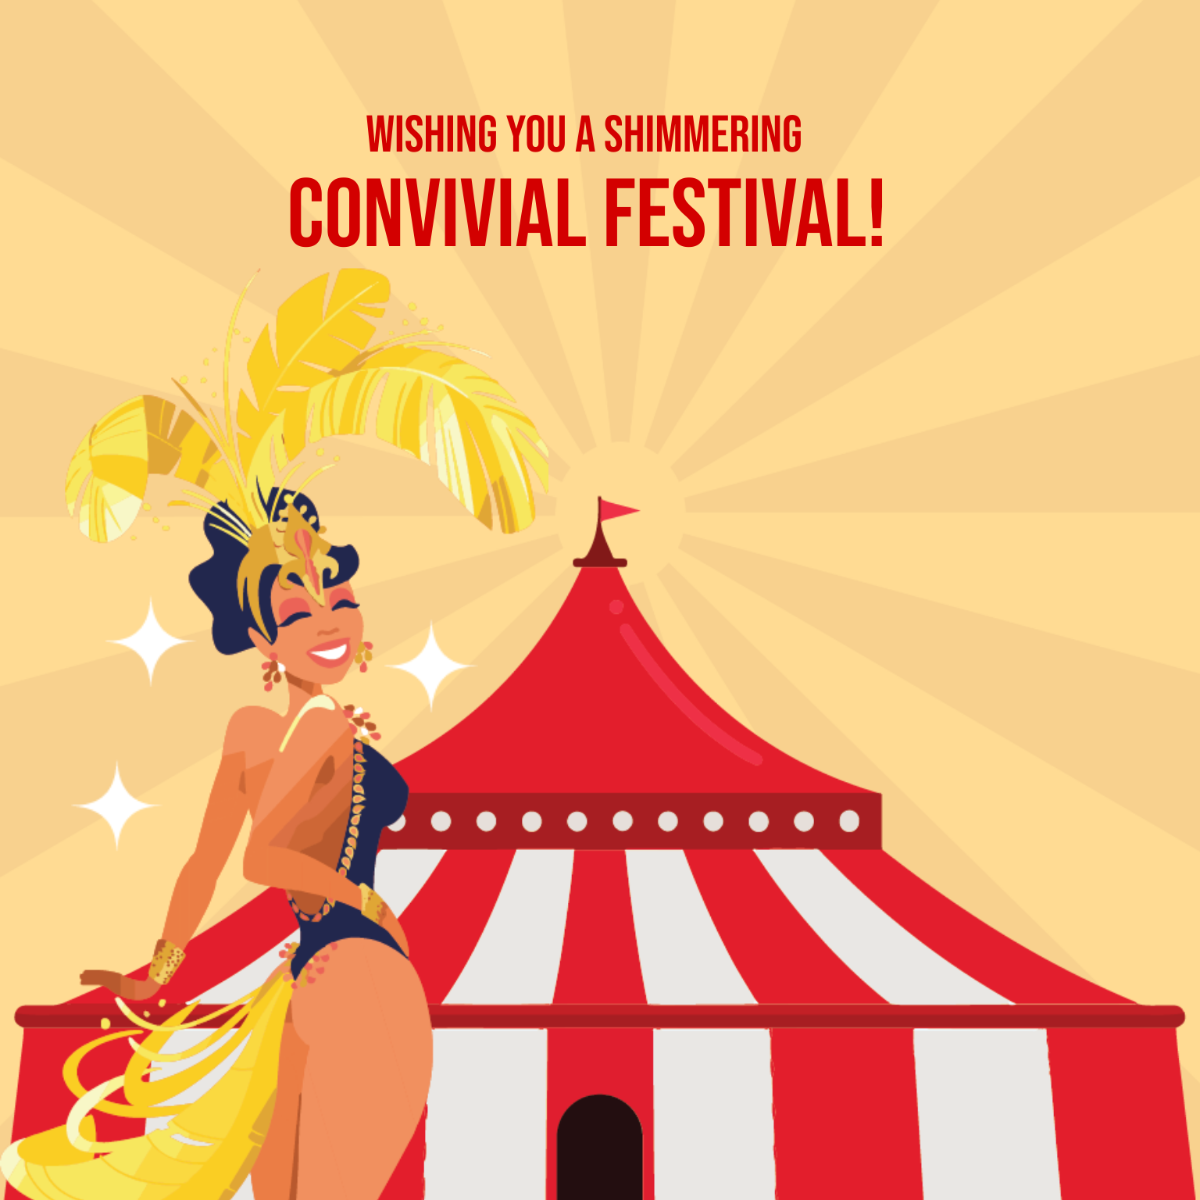 Carnival Festival Wishes Vector Template